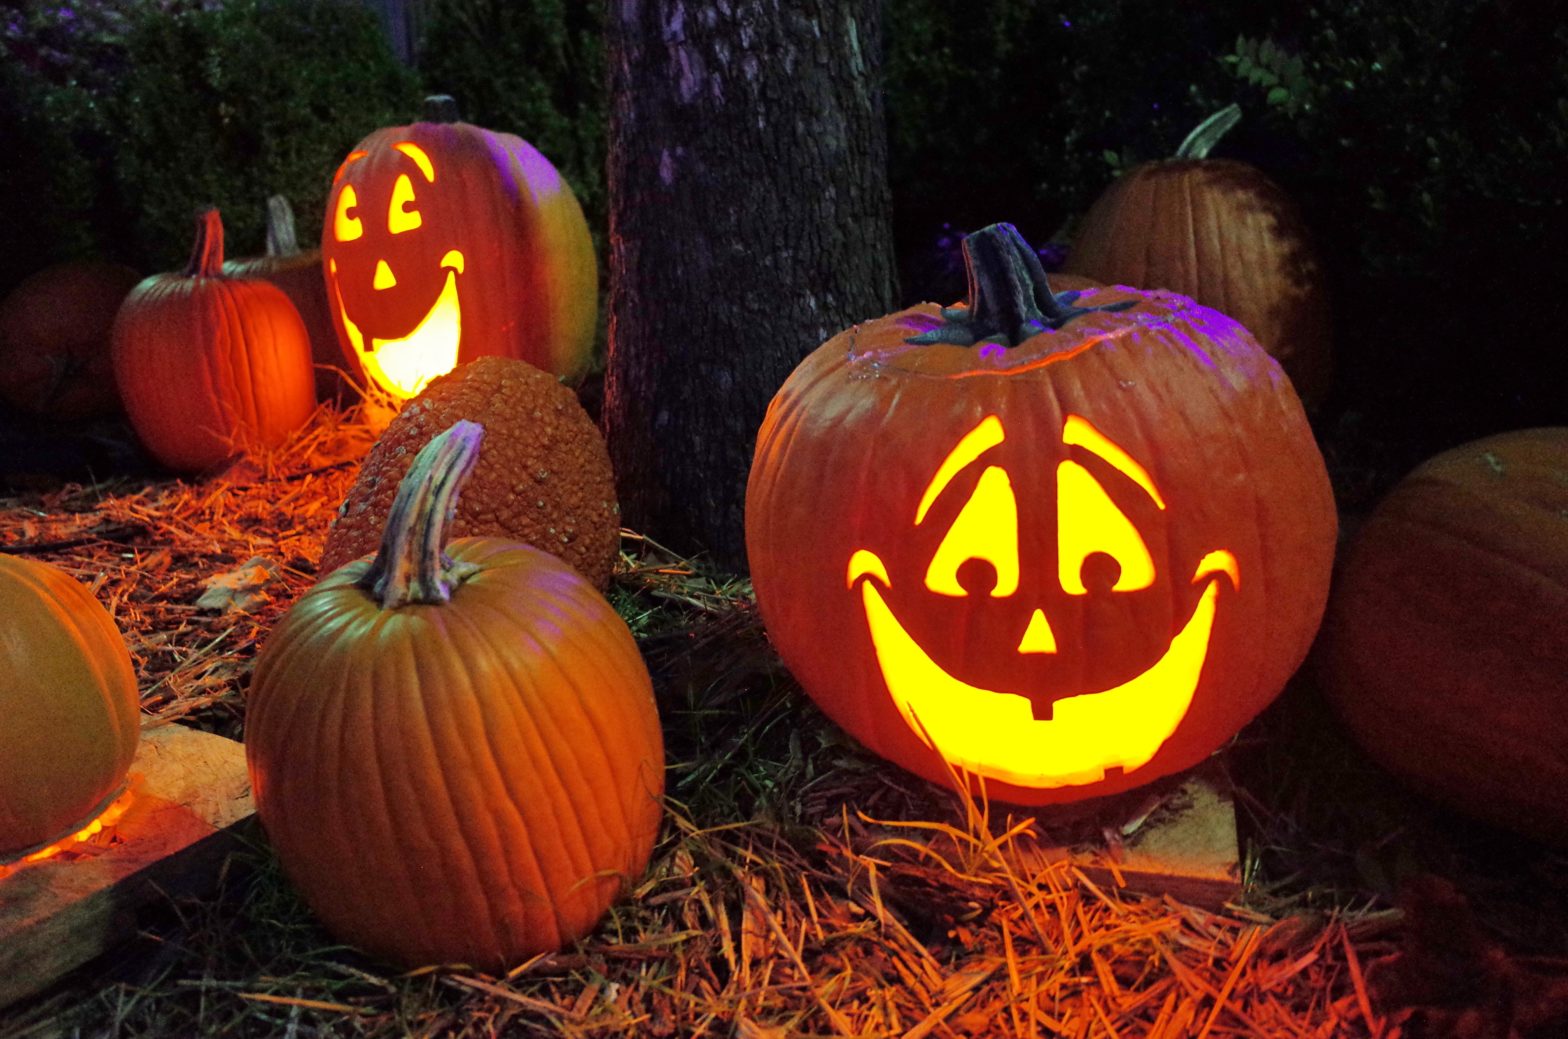 Halloween Is Almost Here! Here Are Some Things To Do For The Spooky Season